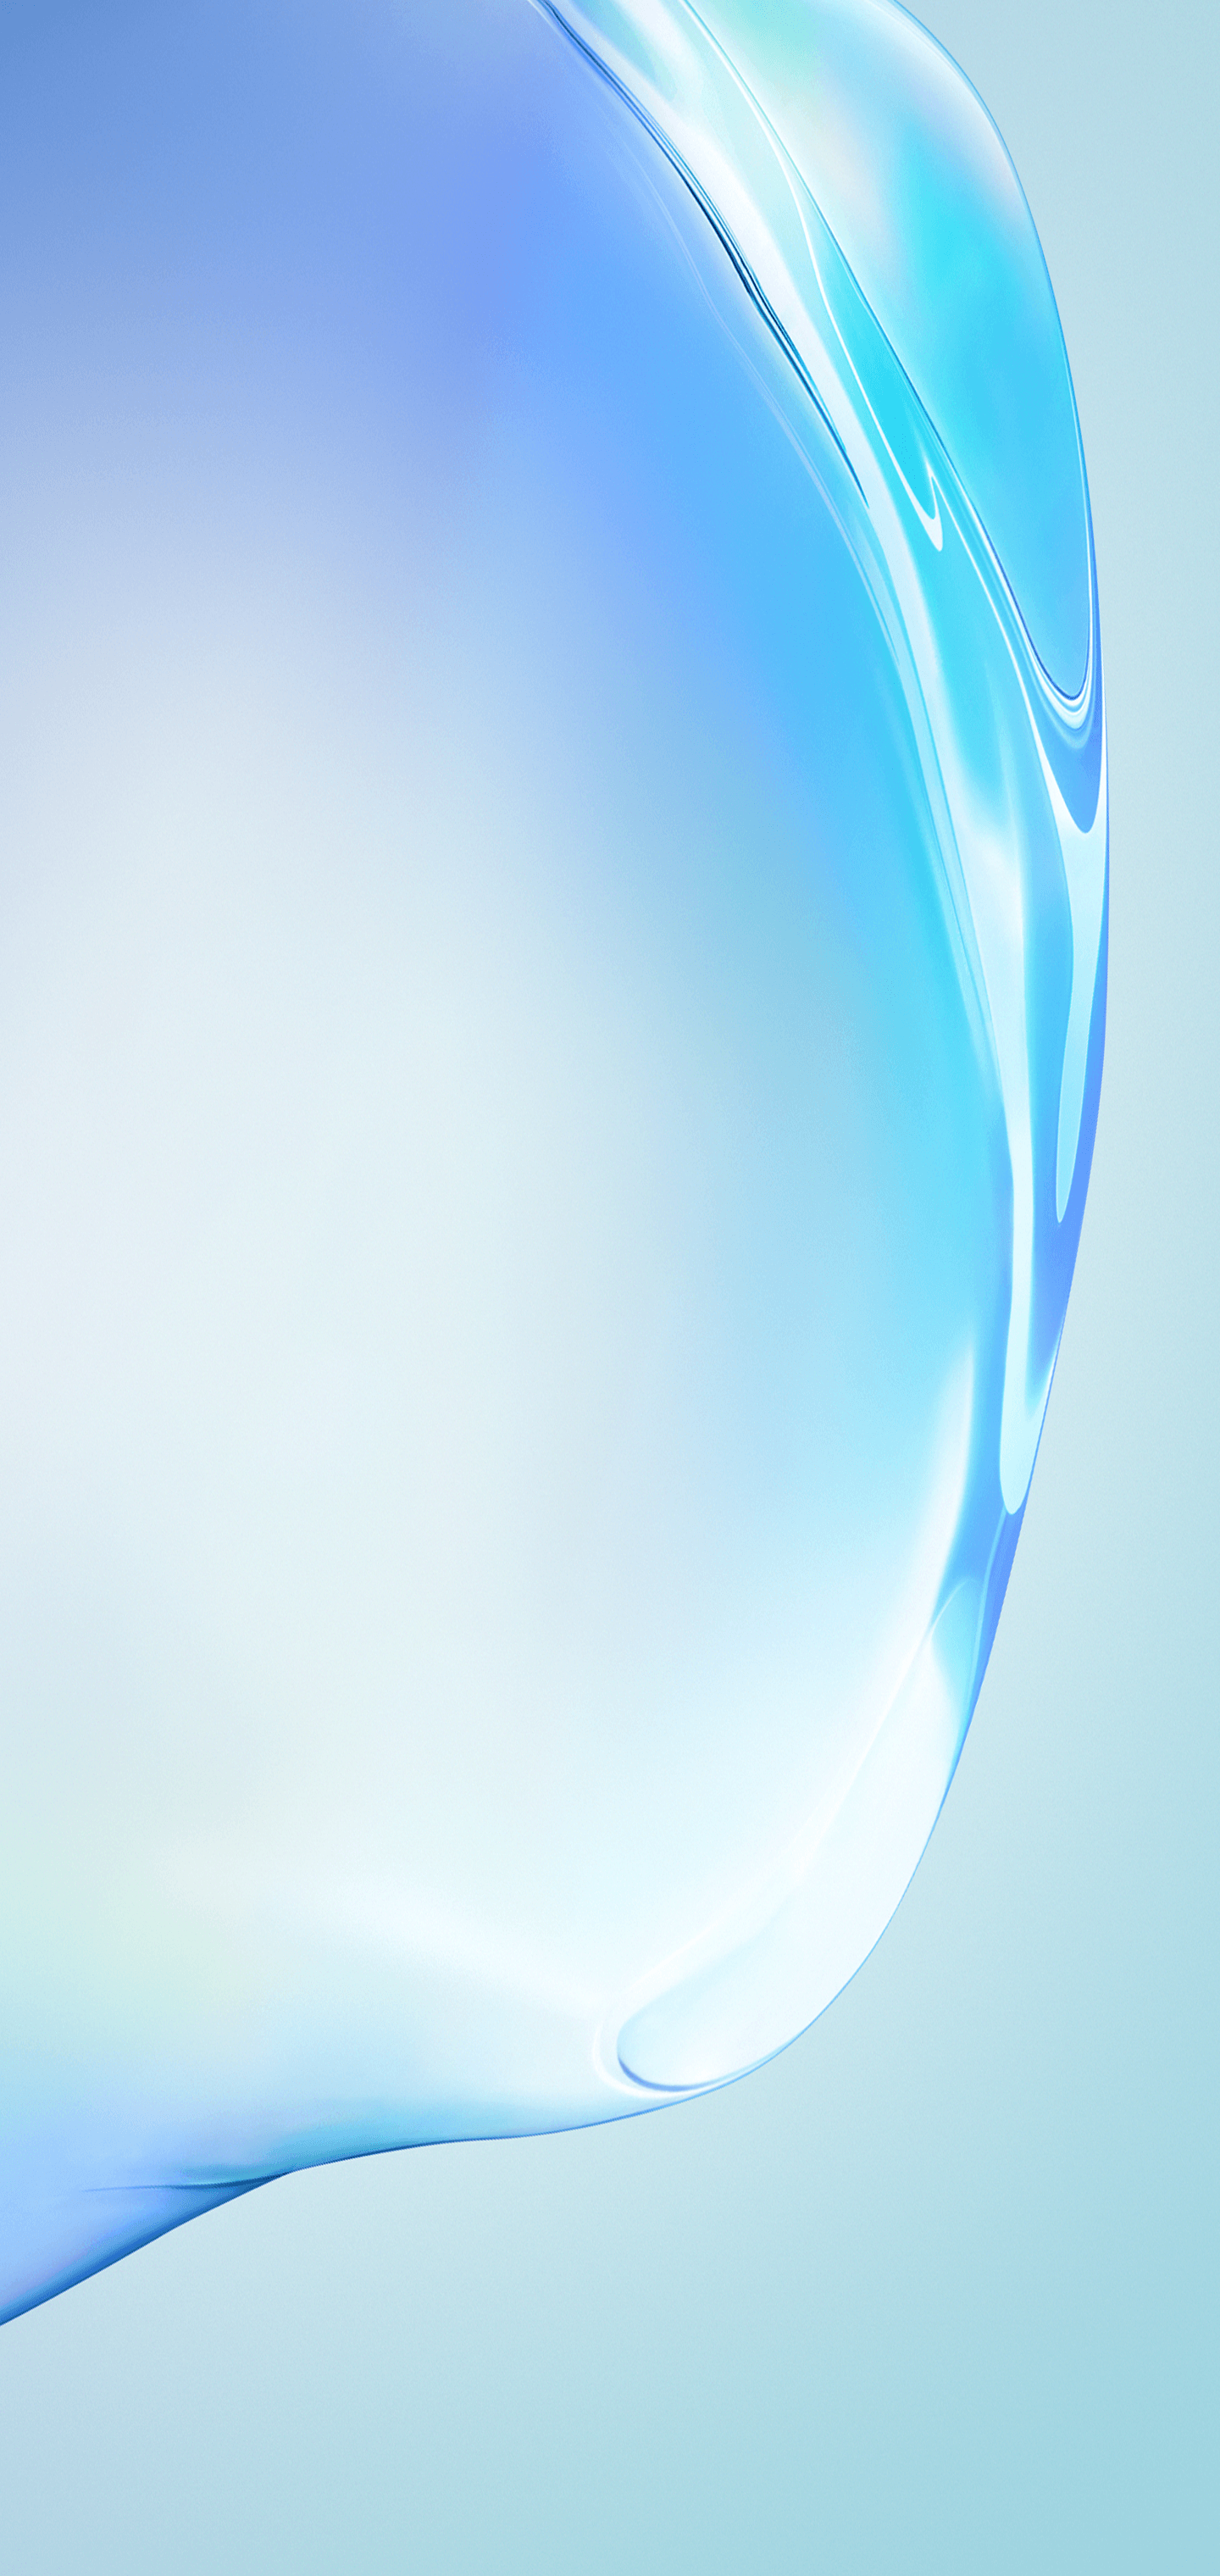 Download Samsung Galaxy Note 10 Official Wallpaper Here! Full HD